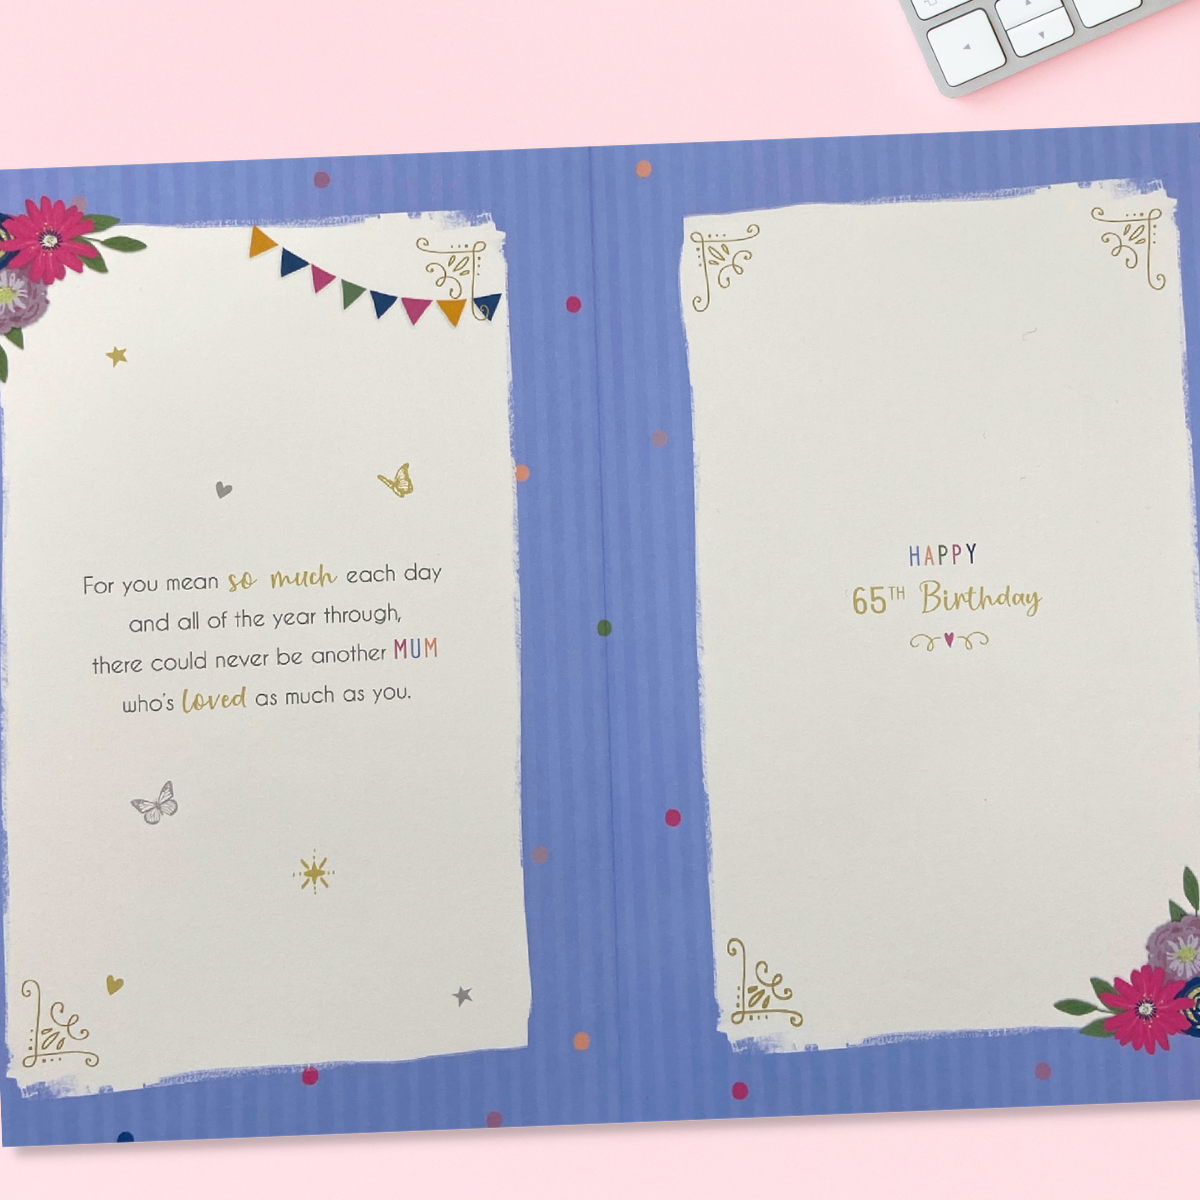 inside image with lilac insert with colourful graphics, flowers and butterflies